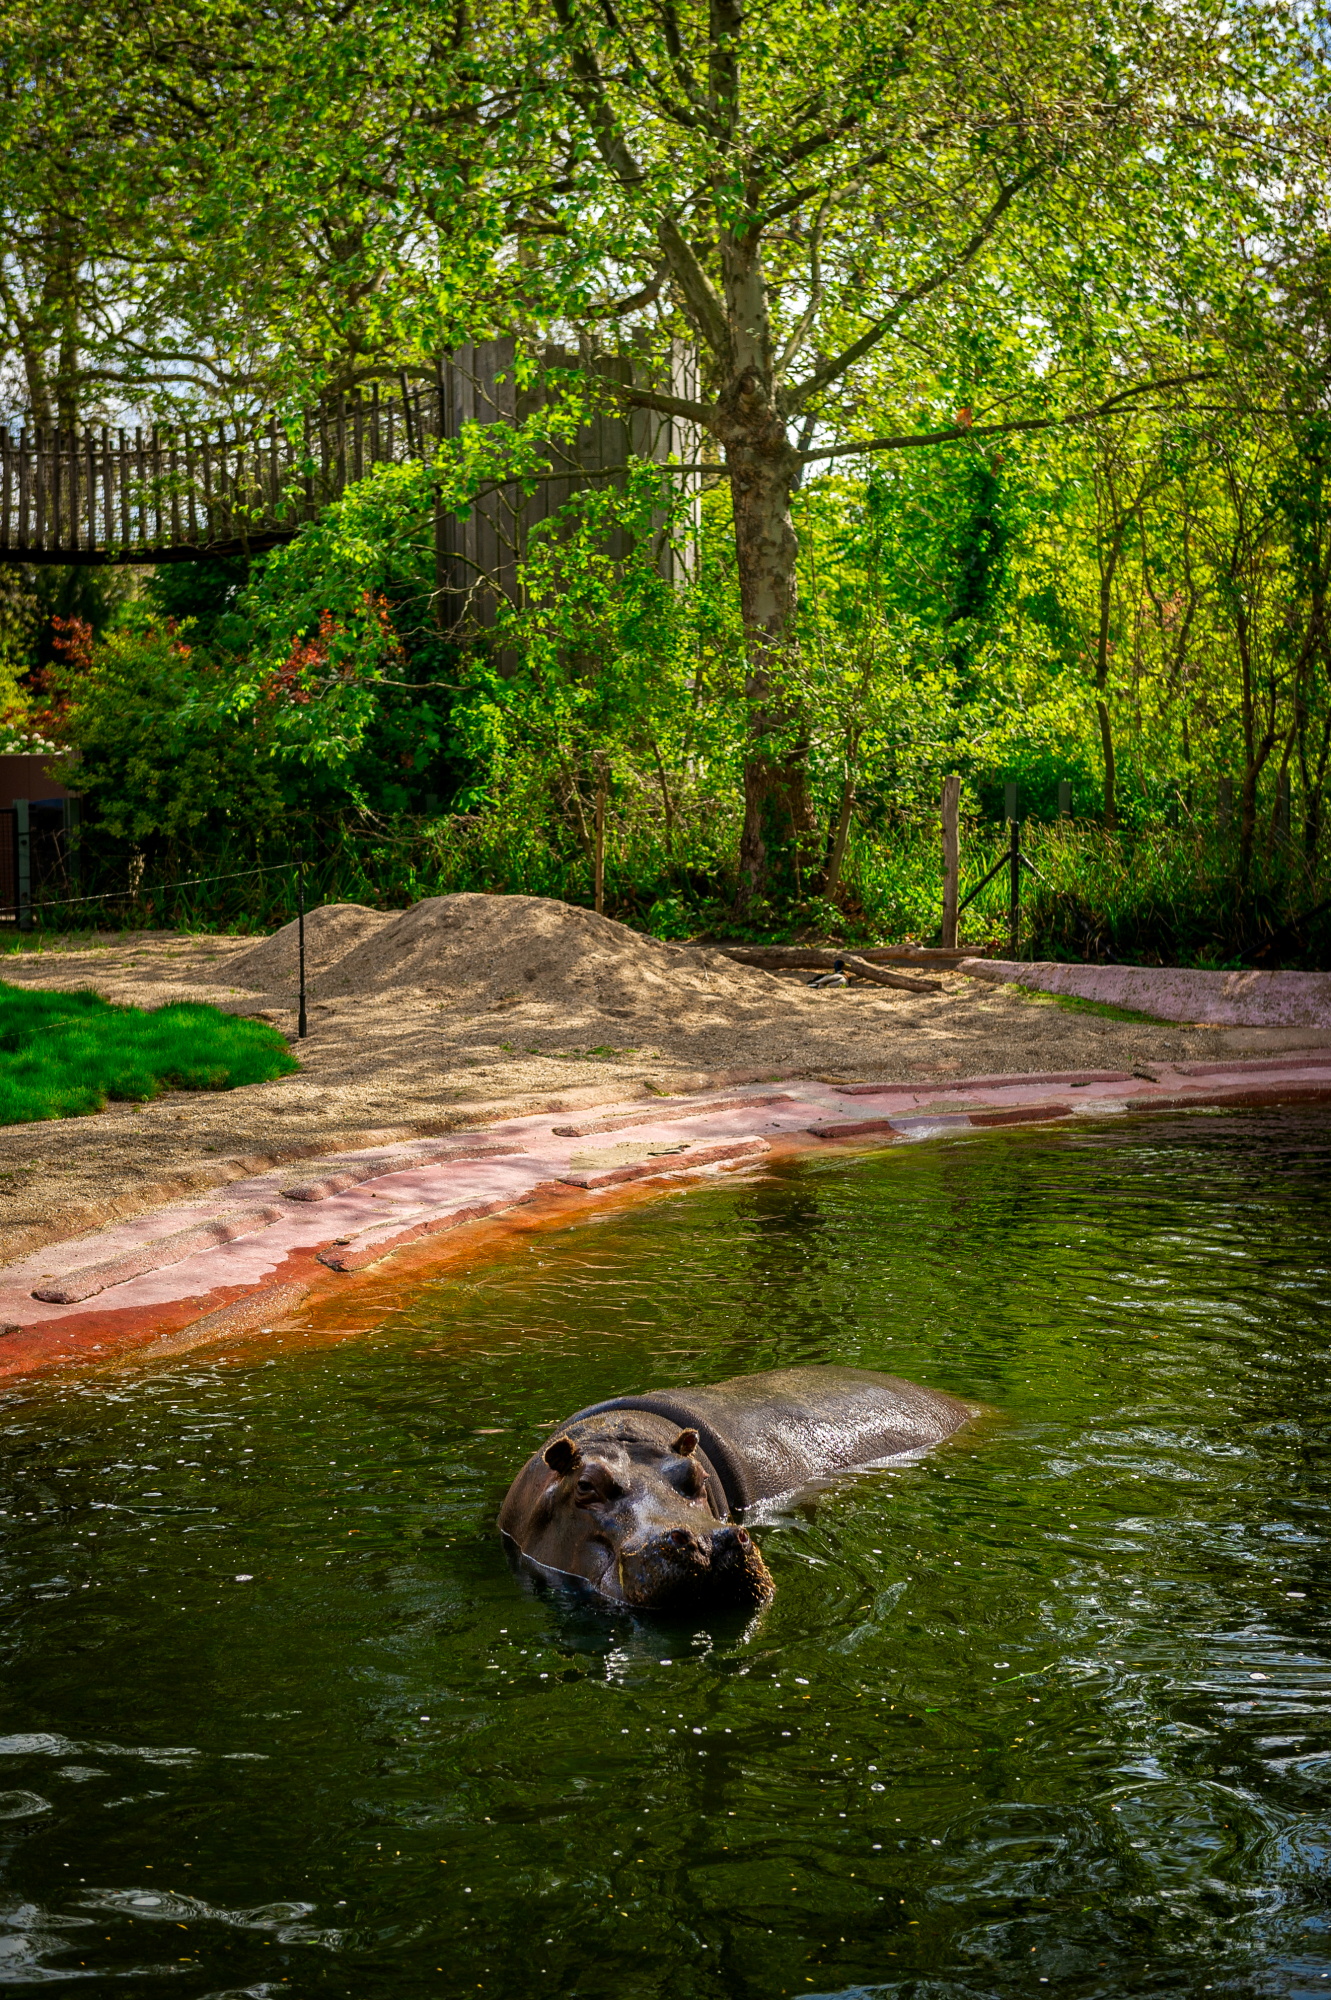 Hippos that have recently tested positive for COVID-19 are seen at Antwerp Zoo